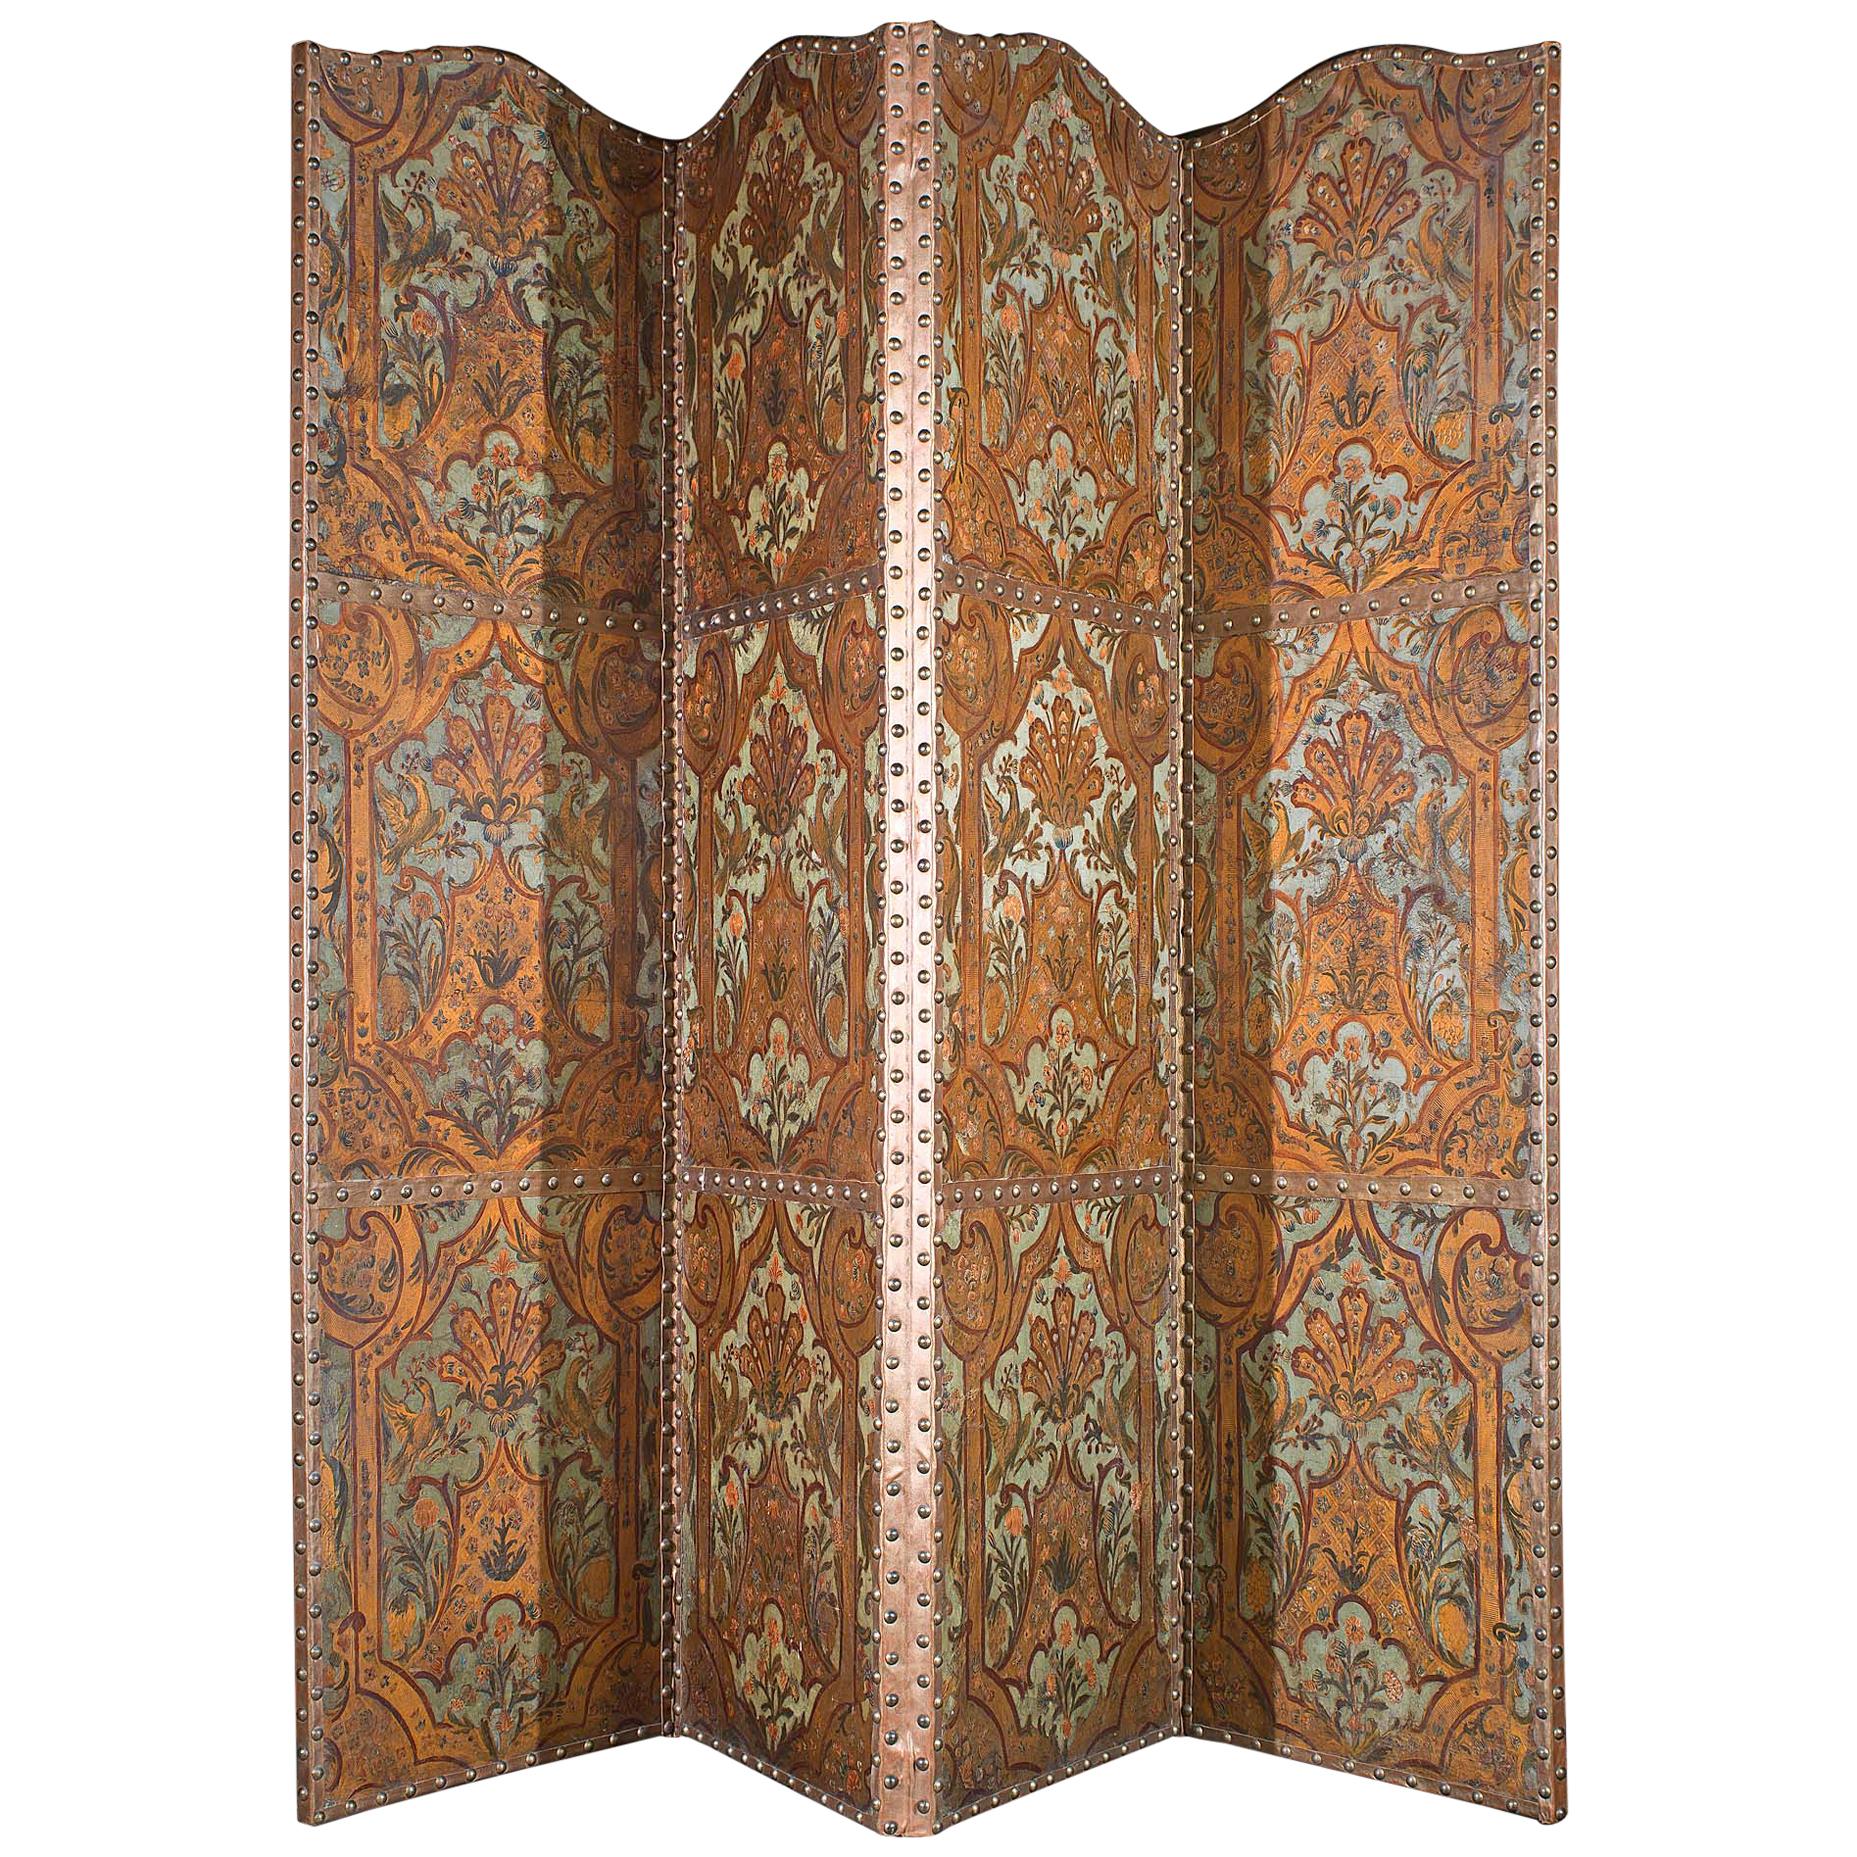 A Four Fold 19th Century Painted Screen